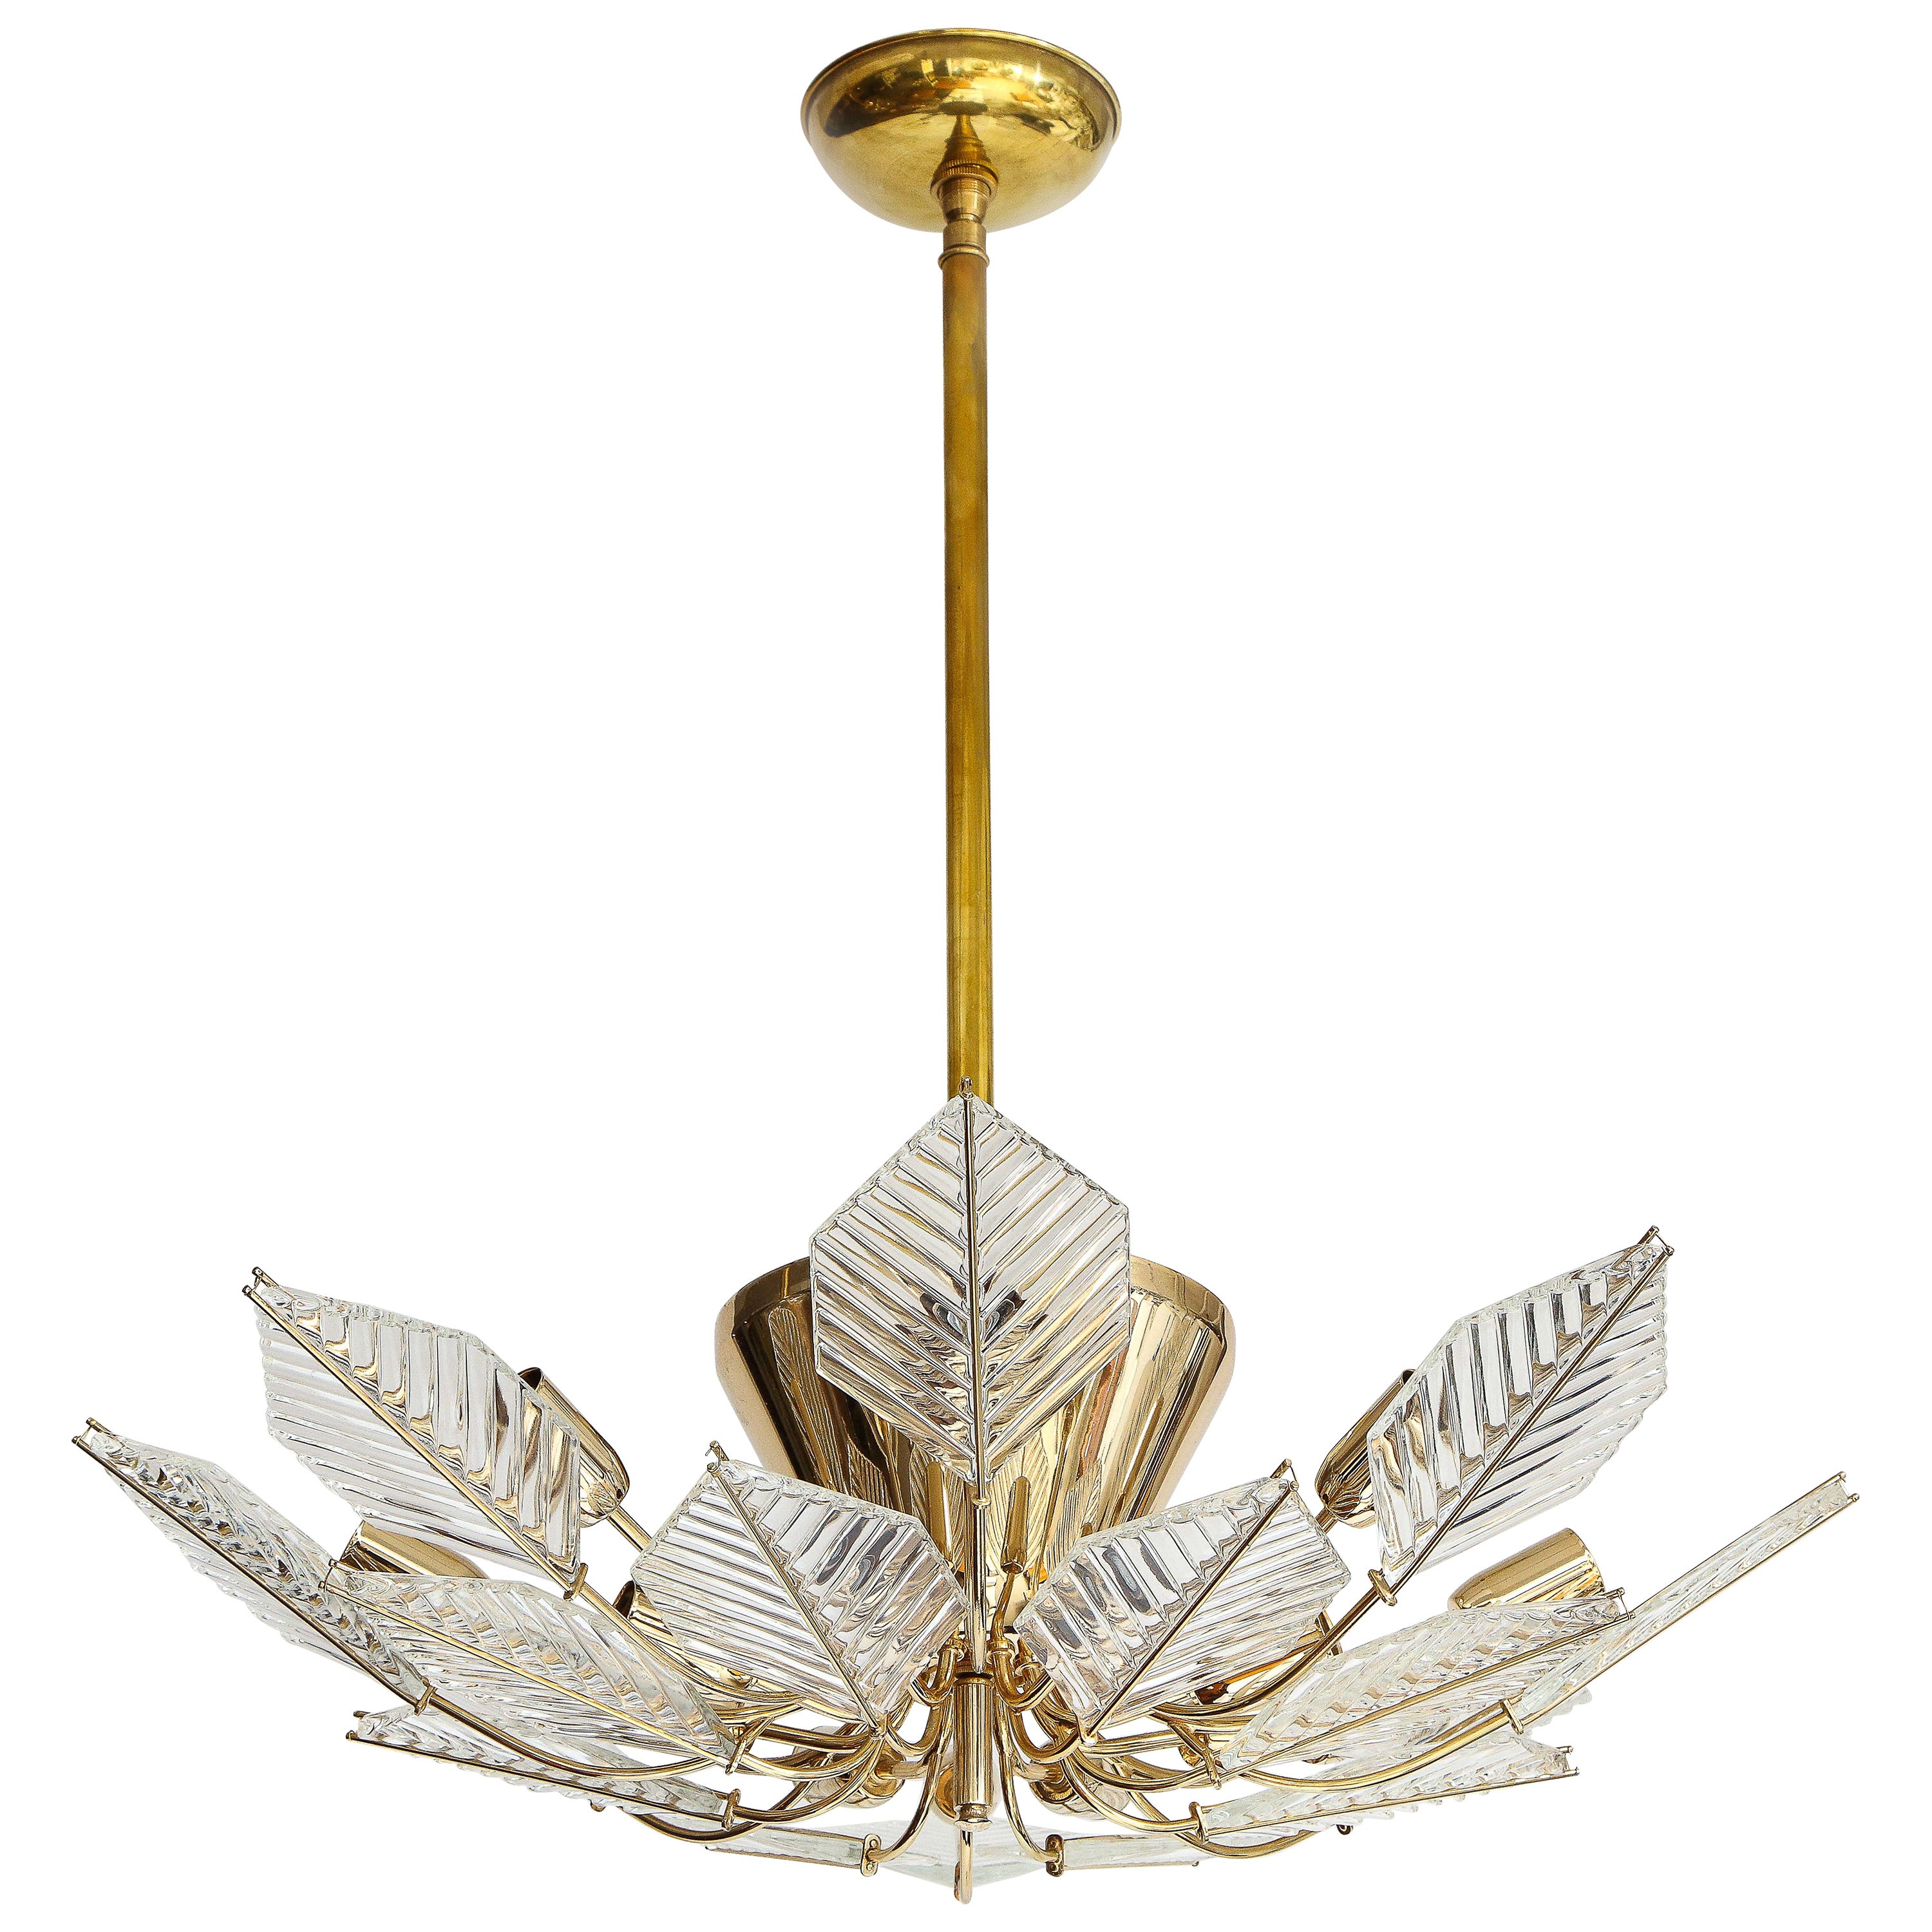 Italian 15 Light Glass Chandelier Decorated with Leaf Motif, La Murrina, 1970's For Sale